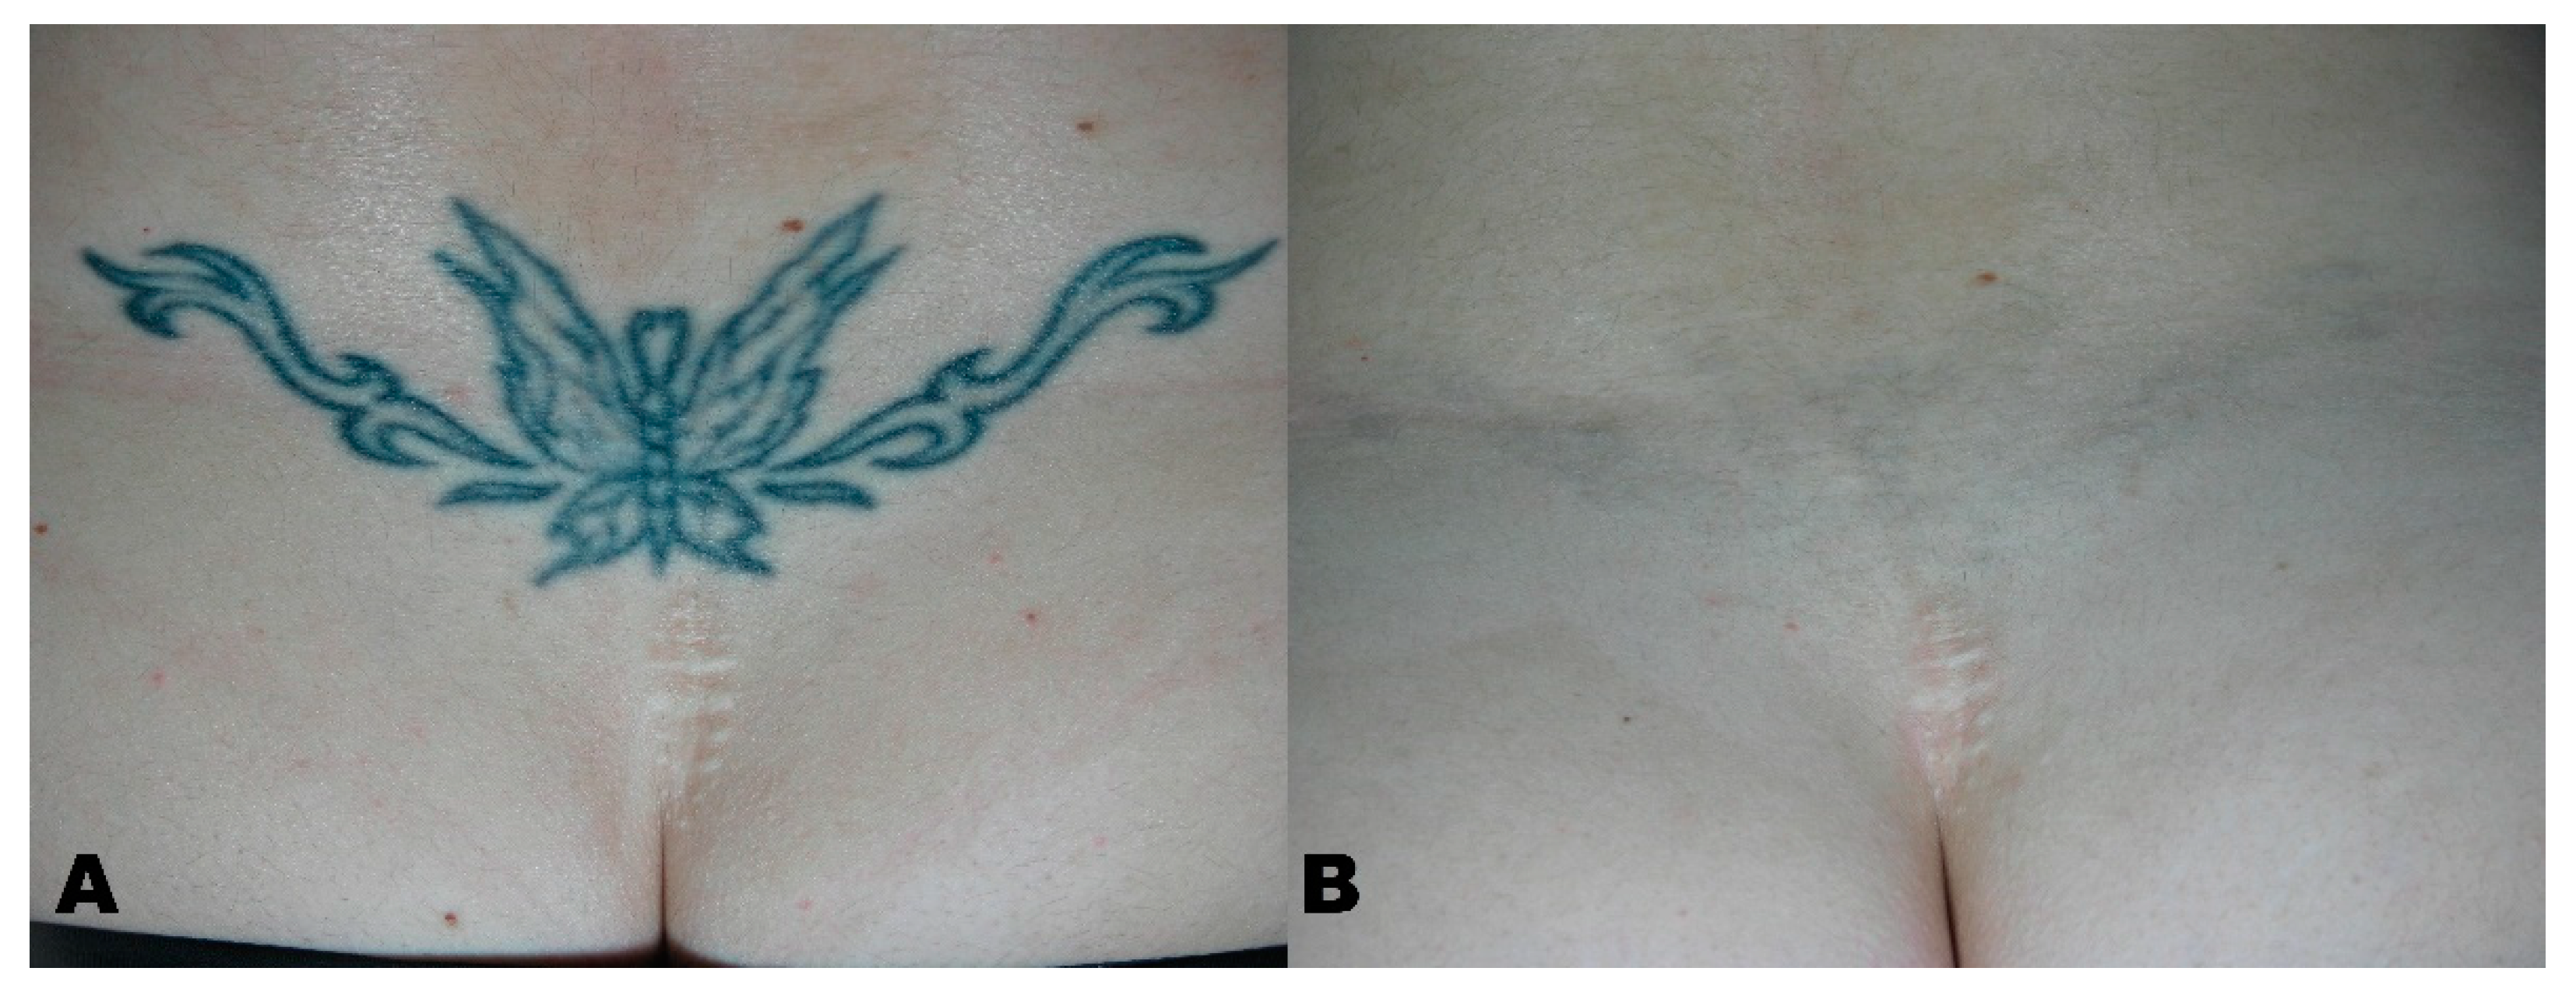 Why Tattoo Removal Treatments Are a Great Option During the Winter